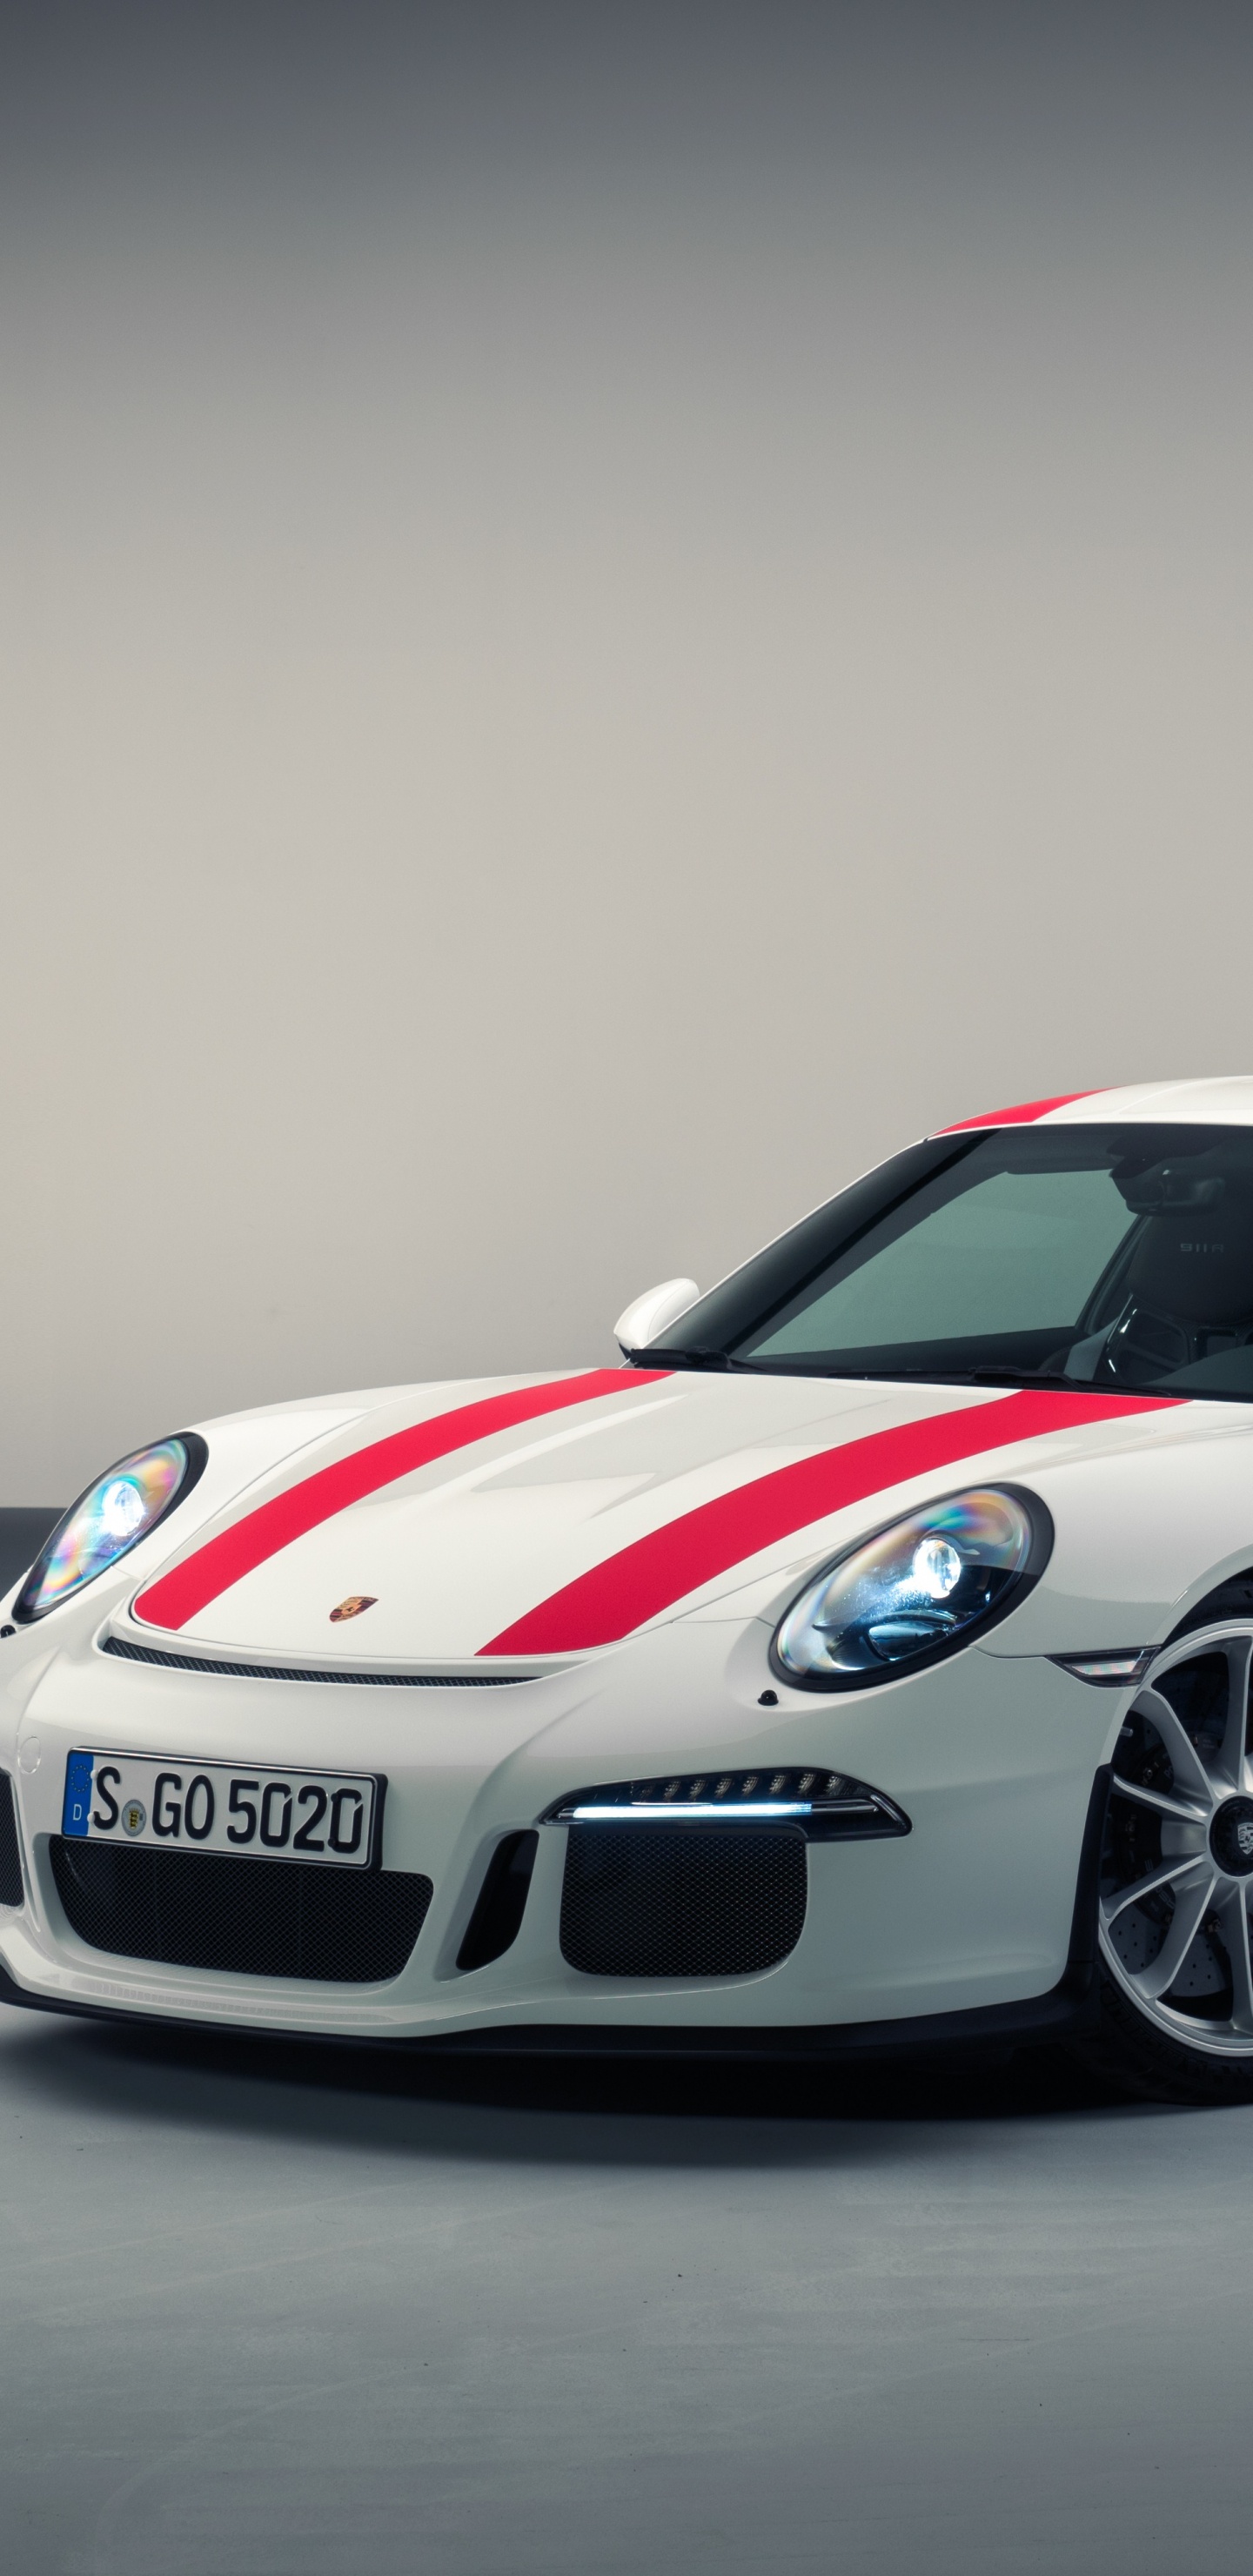 White and Red Porsche 911. Wallpaper in 1440x2960 Resolution